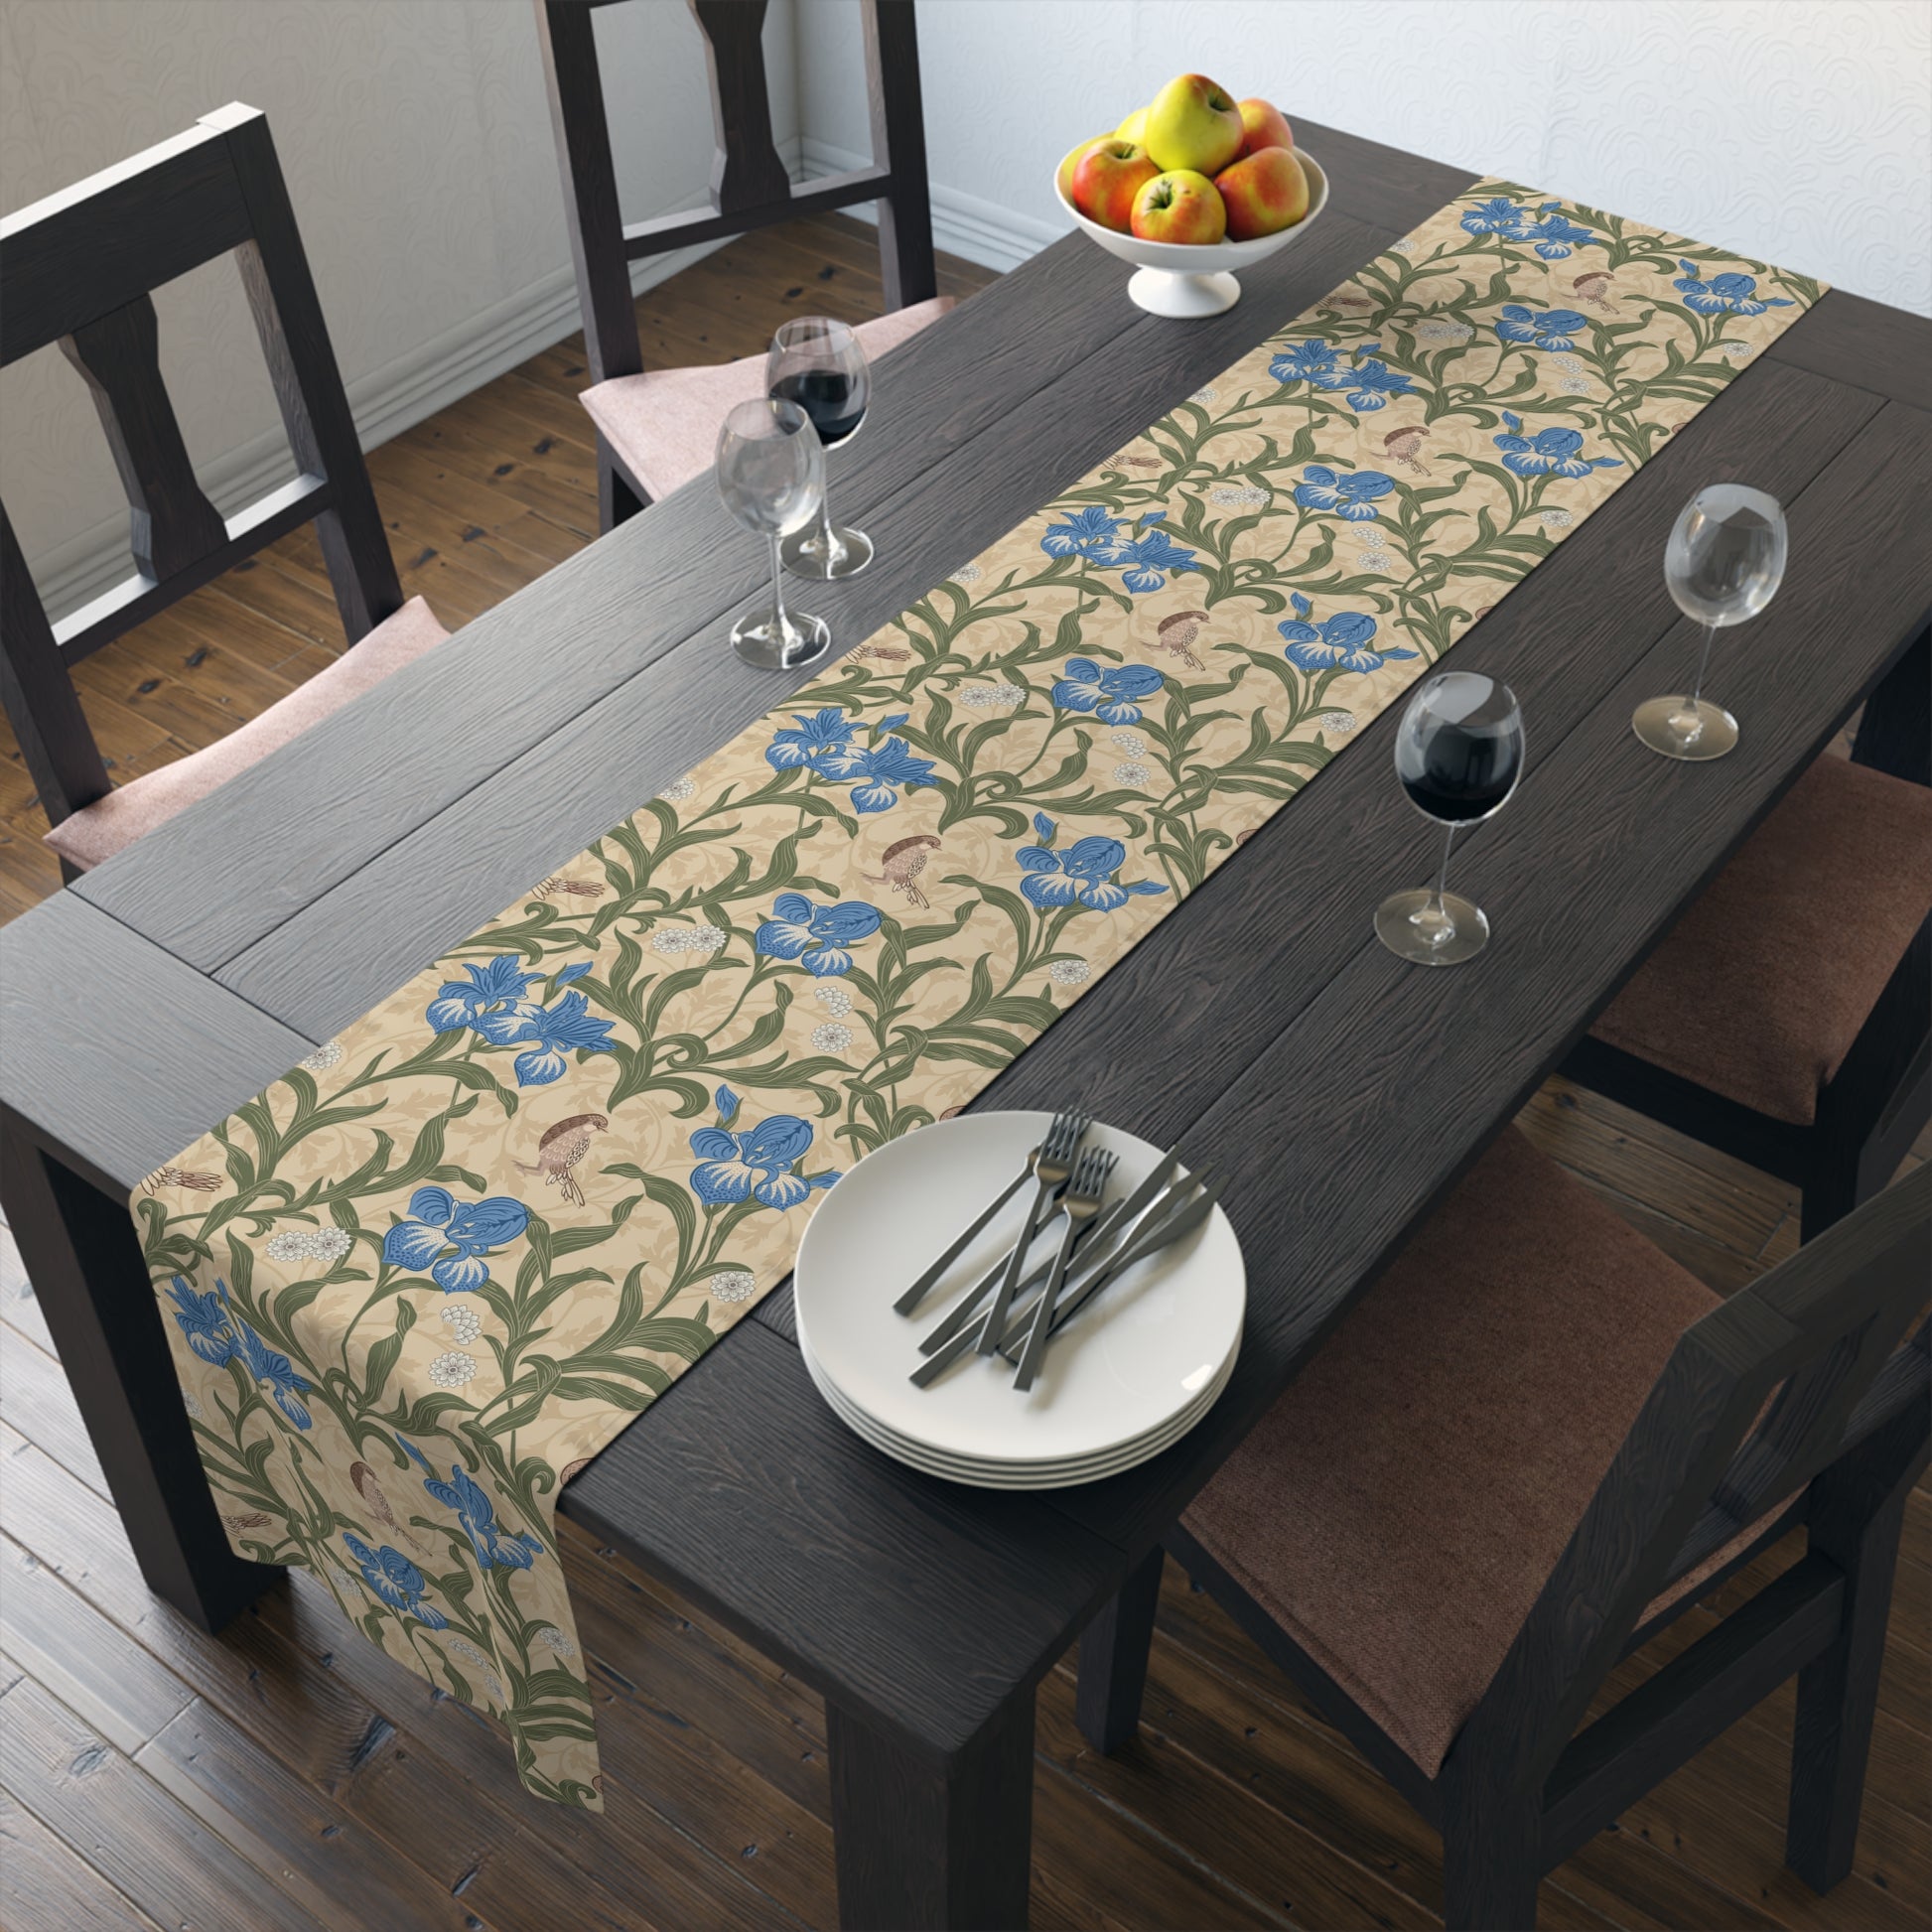 william-morris-co-table-runner-blue-iris-collection-21